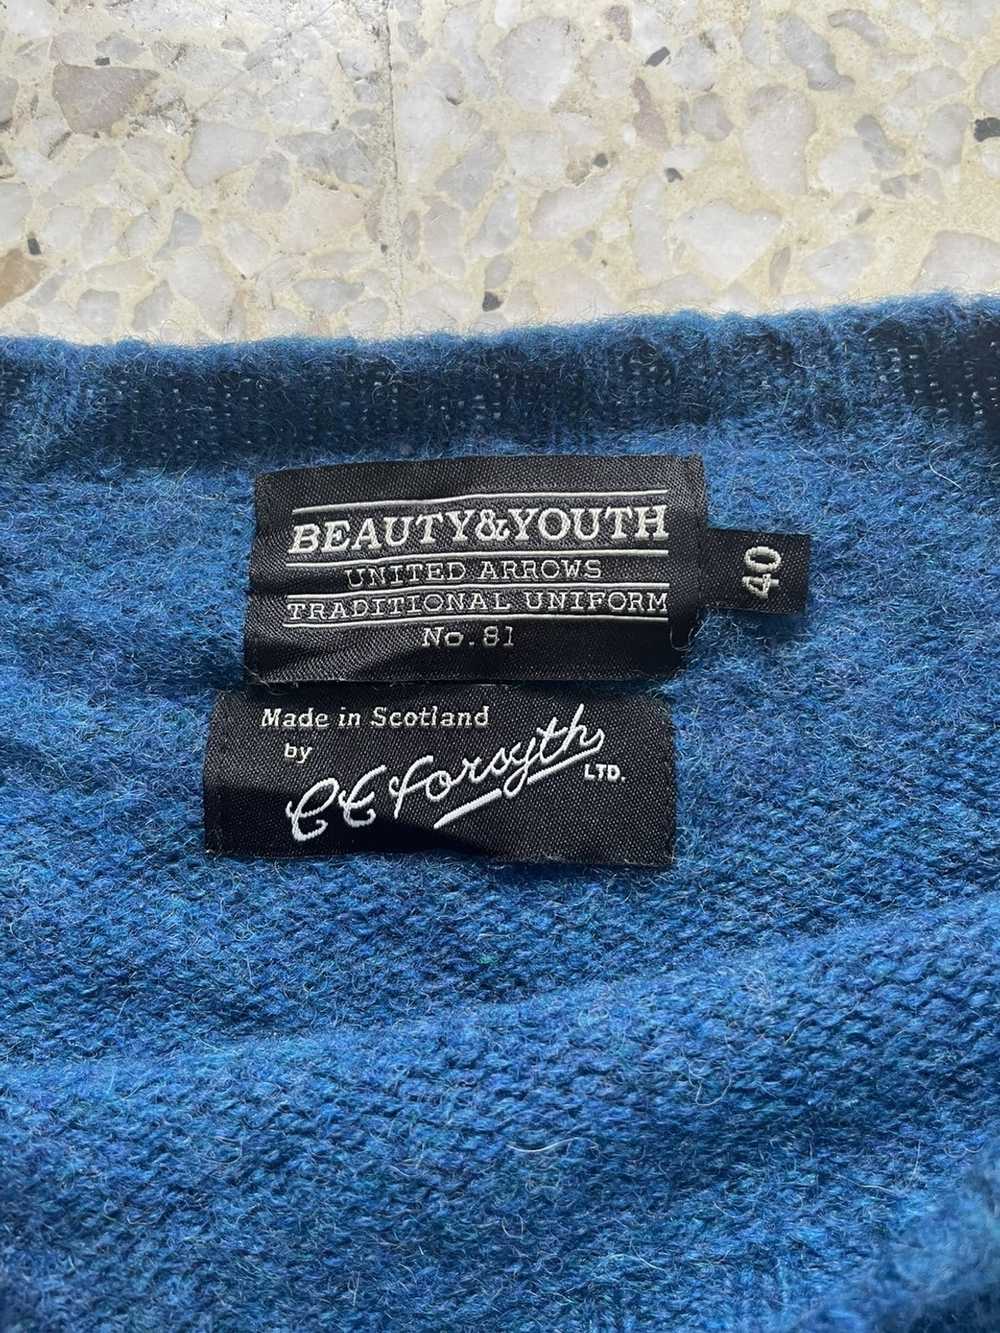 Beauty & Youth × United Arrows Beauty and youth - image 3